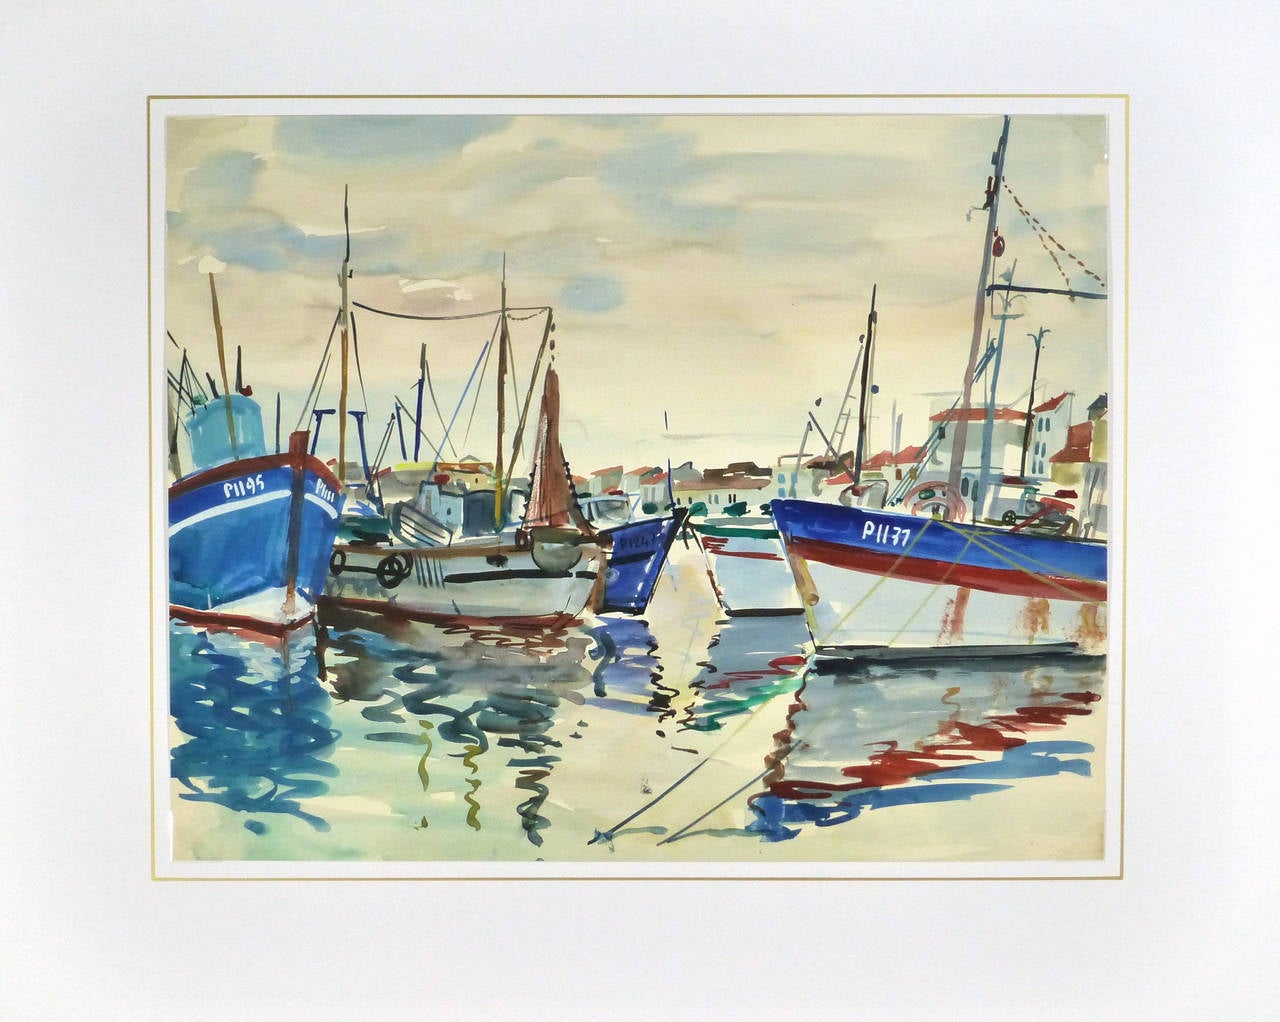 Outstanding maritime landscape of colorful boats docked in a harbor, their reflections glistening in the water by French artist Stephane Magnard (1917-2010), circa 1955. Unsigned.

Well travelled Stéphane Magnard was the resident artist to the